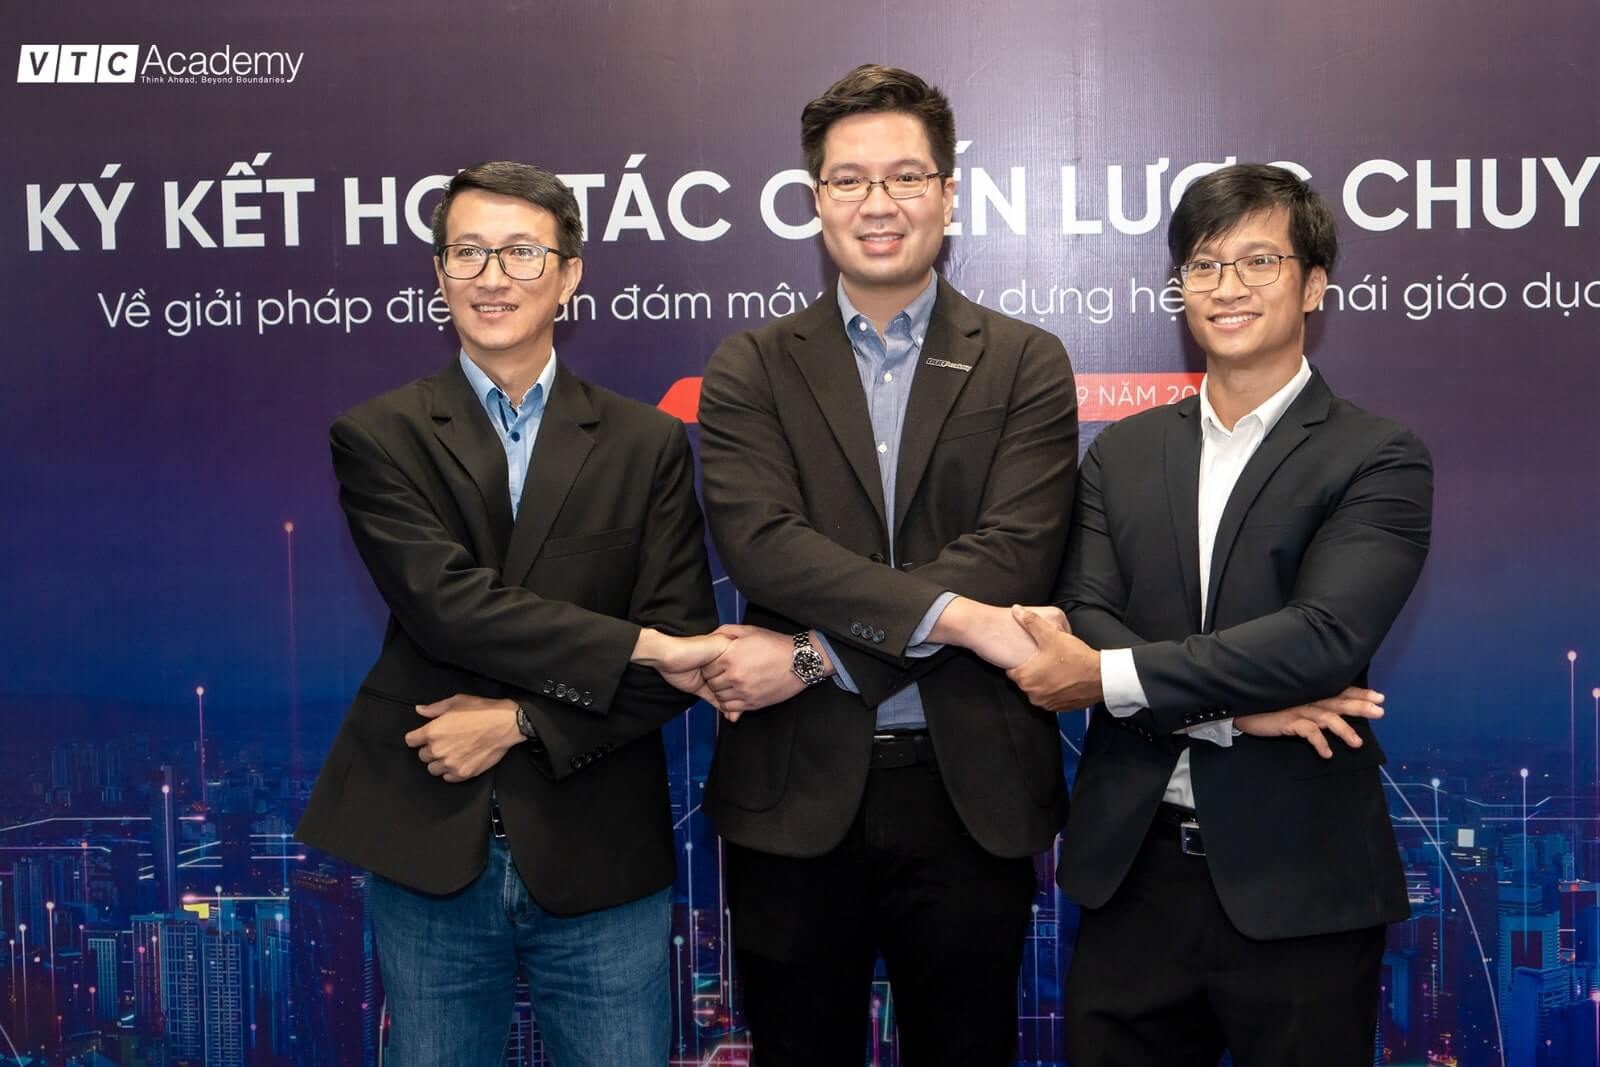 VTC Academy has signed enterprise cooperation for cloud computing in digital transformation solutions  and building an intelligent education ecosystem with VNG Cloud